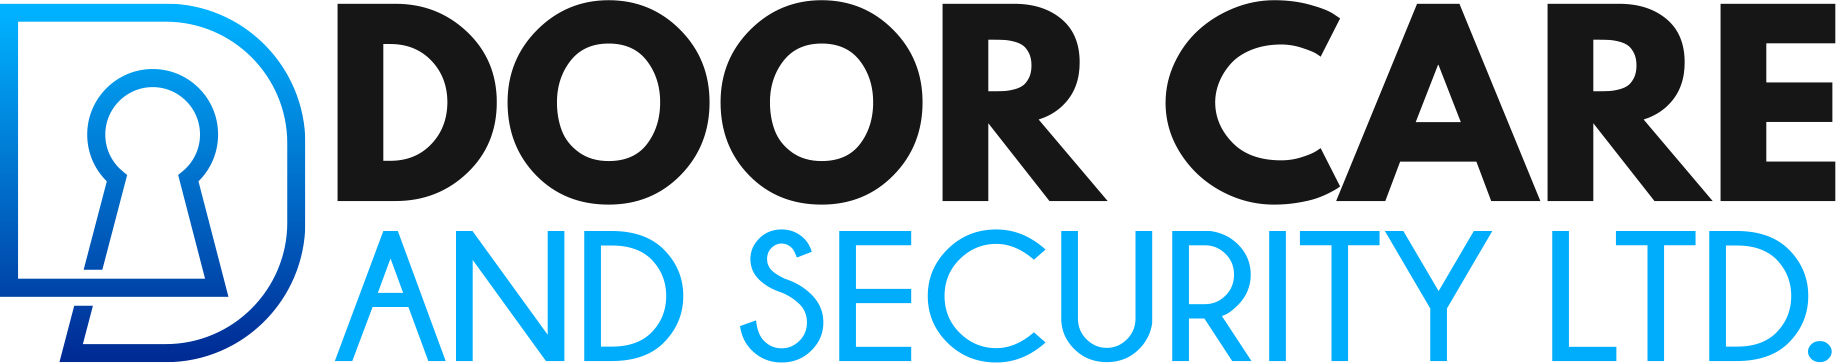 logo for Door Care and Security Ltd